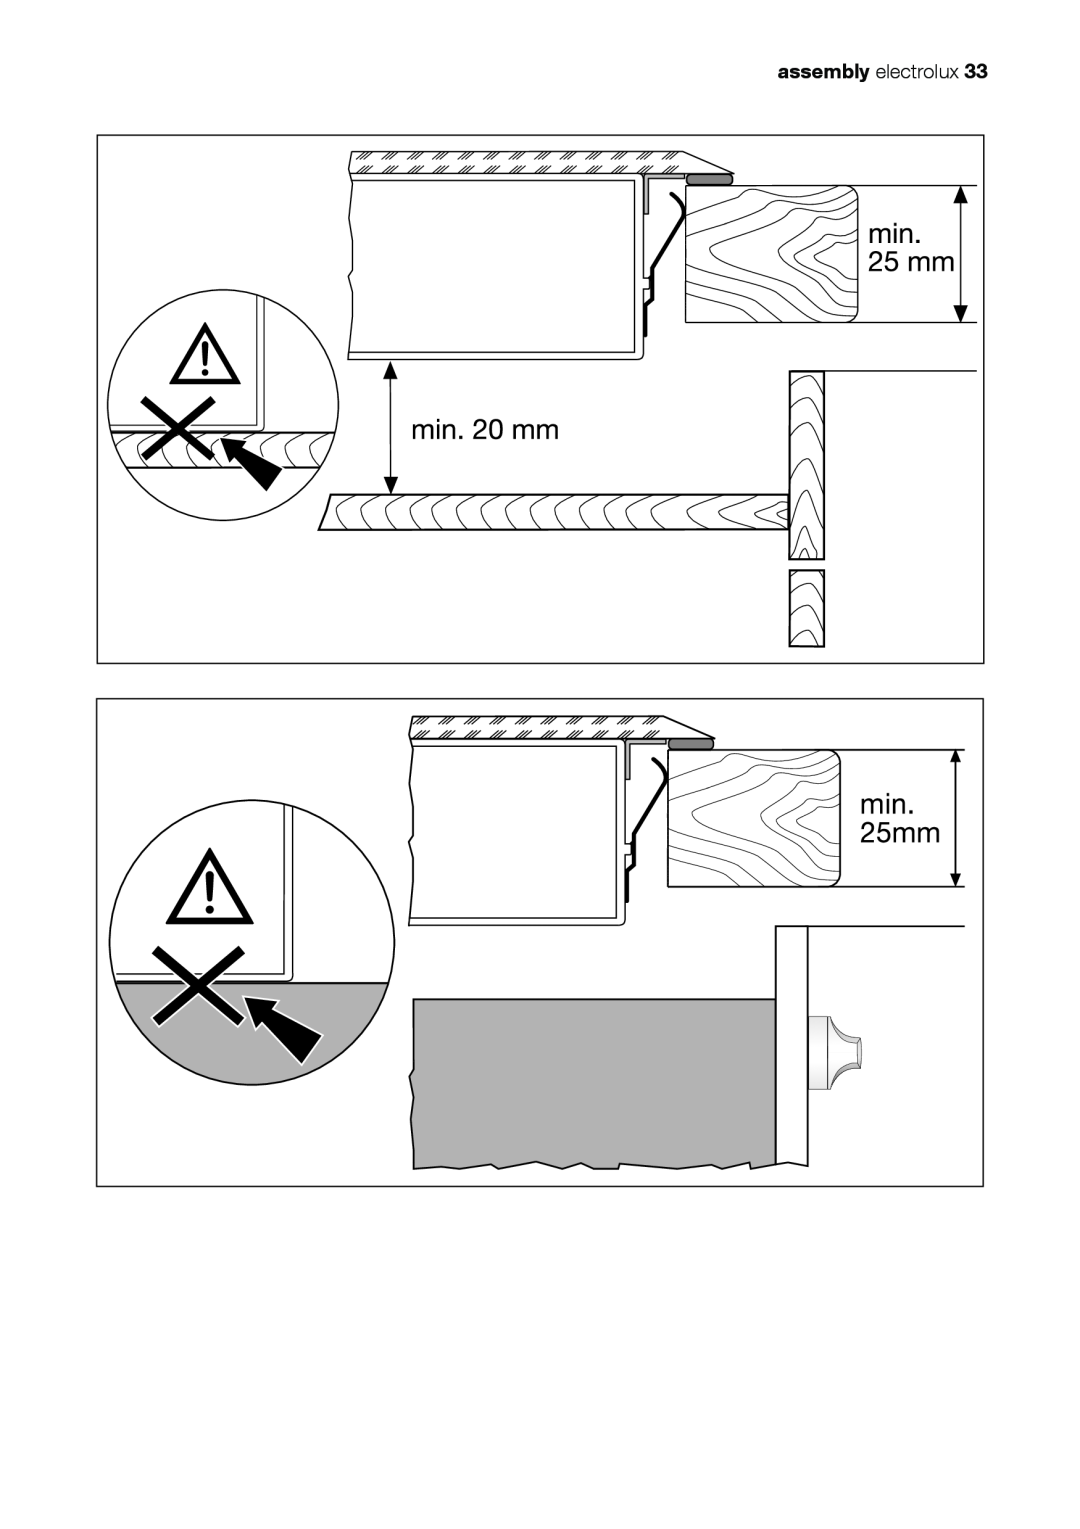 Electrolux EHS601210P user manual assembly electrolux 